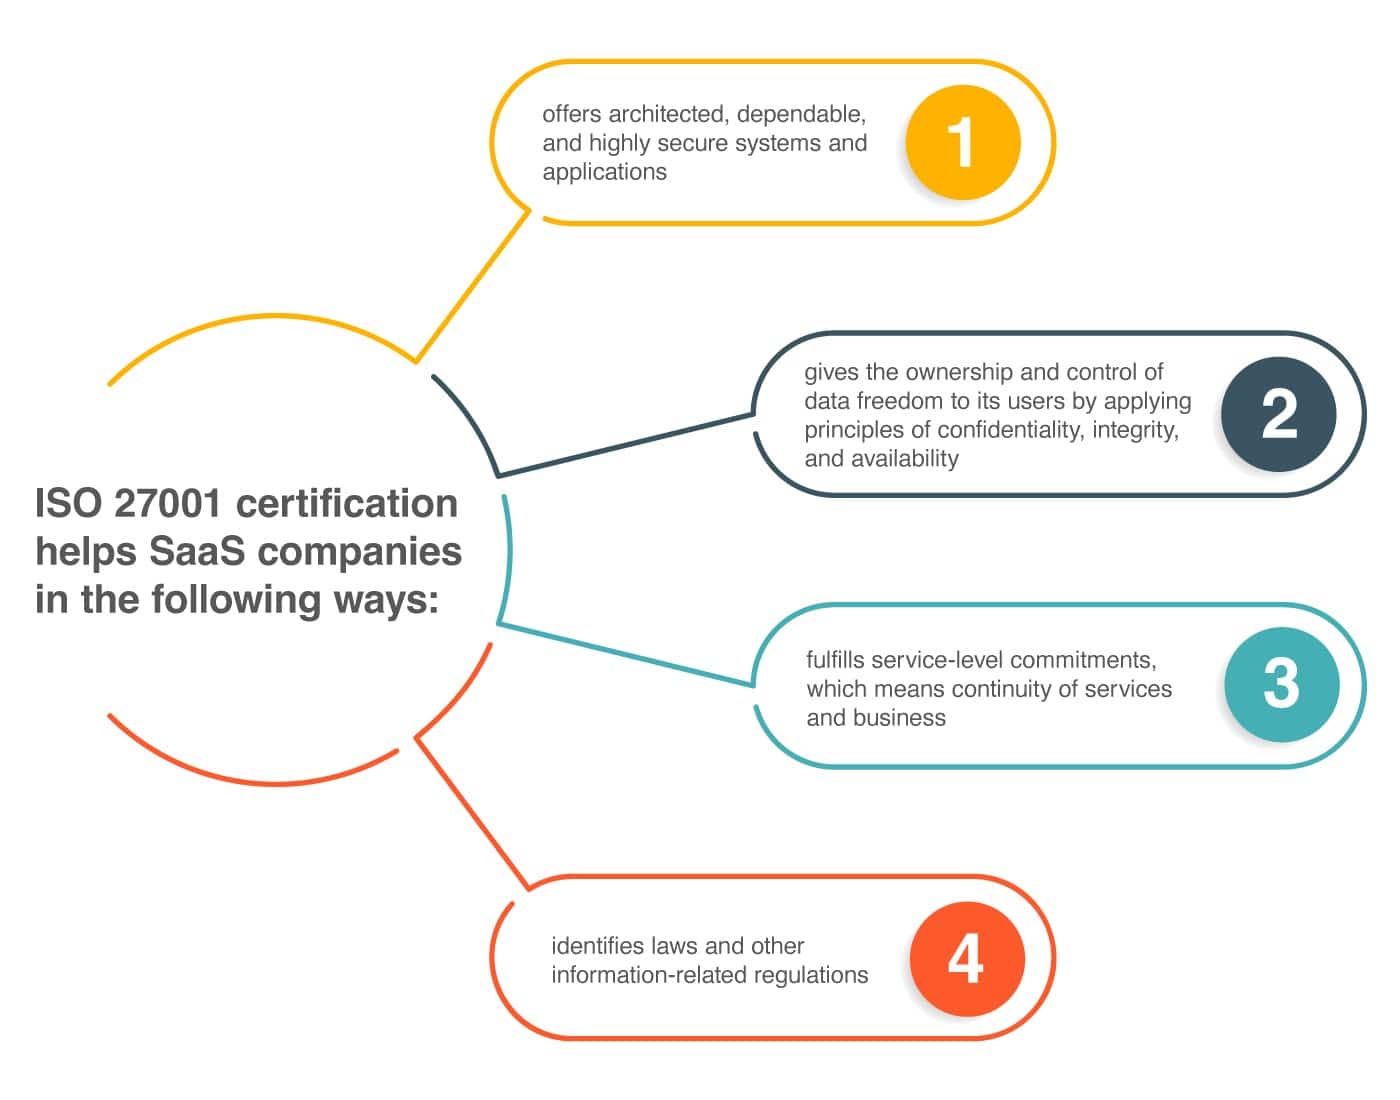 ISO 27001 for SaaS companies - Benefits & how to get certified